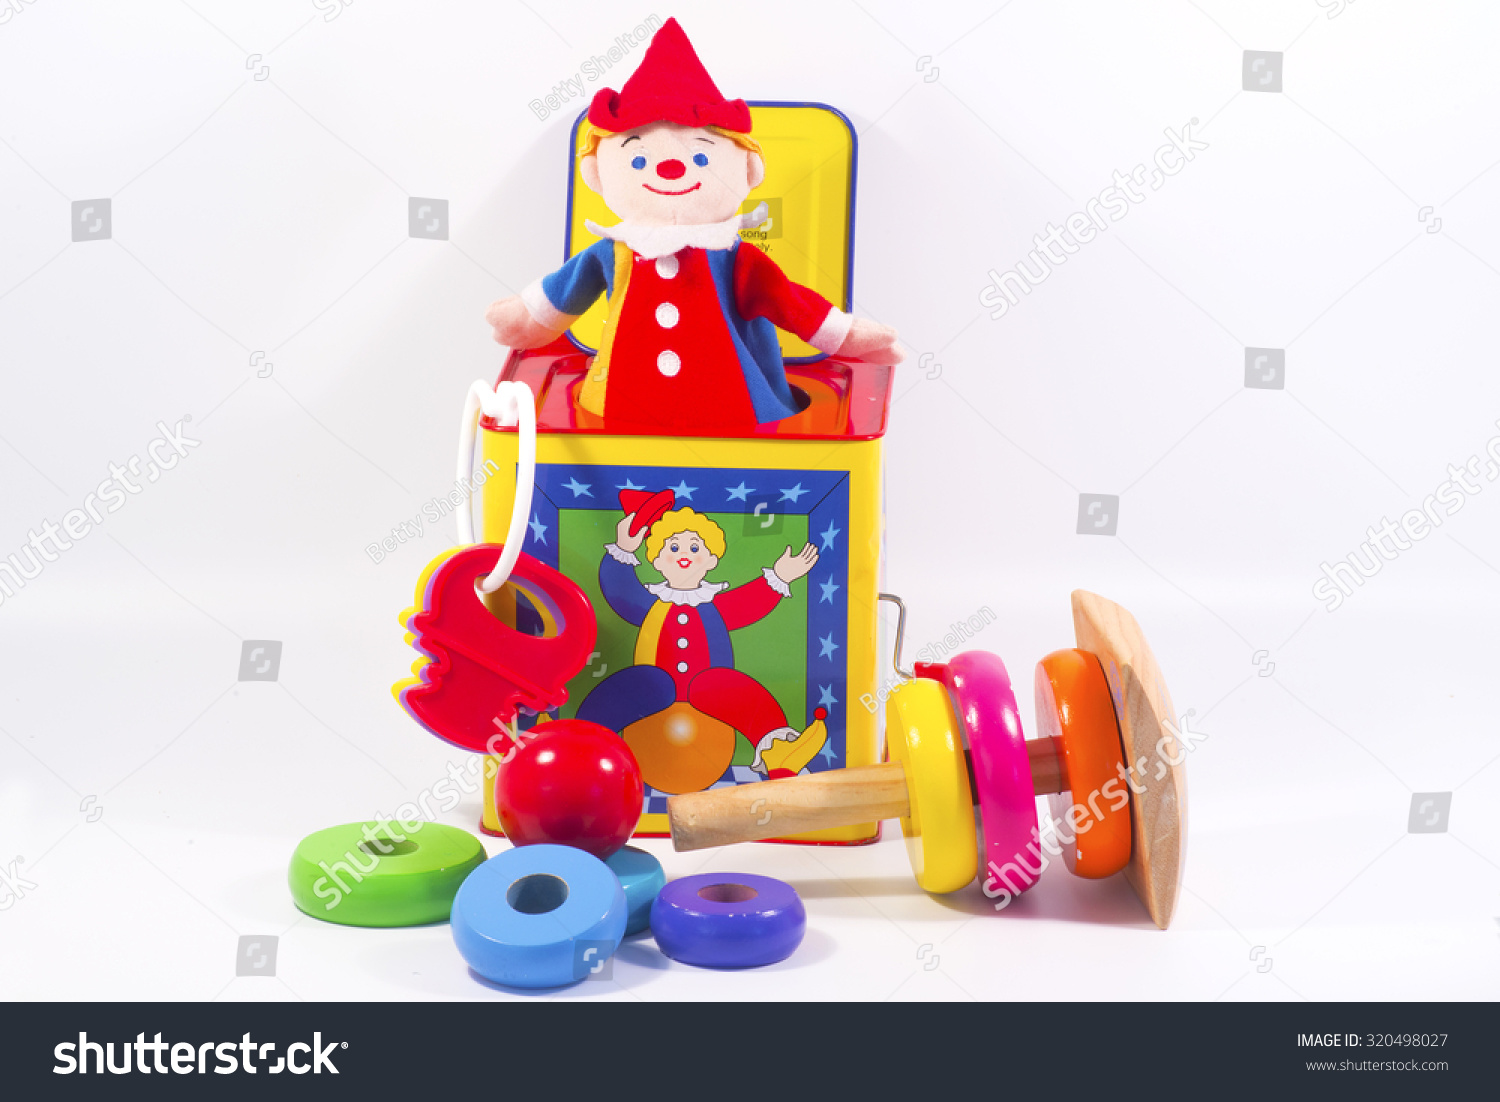 Jack-in-the-box toy and round wooden painted o-rings to stack for kids. #320498027